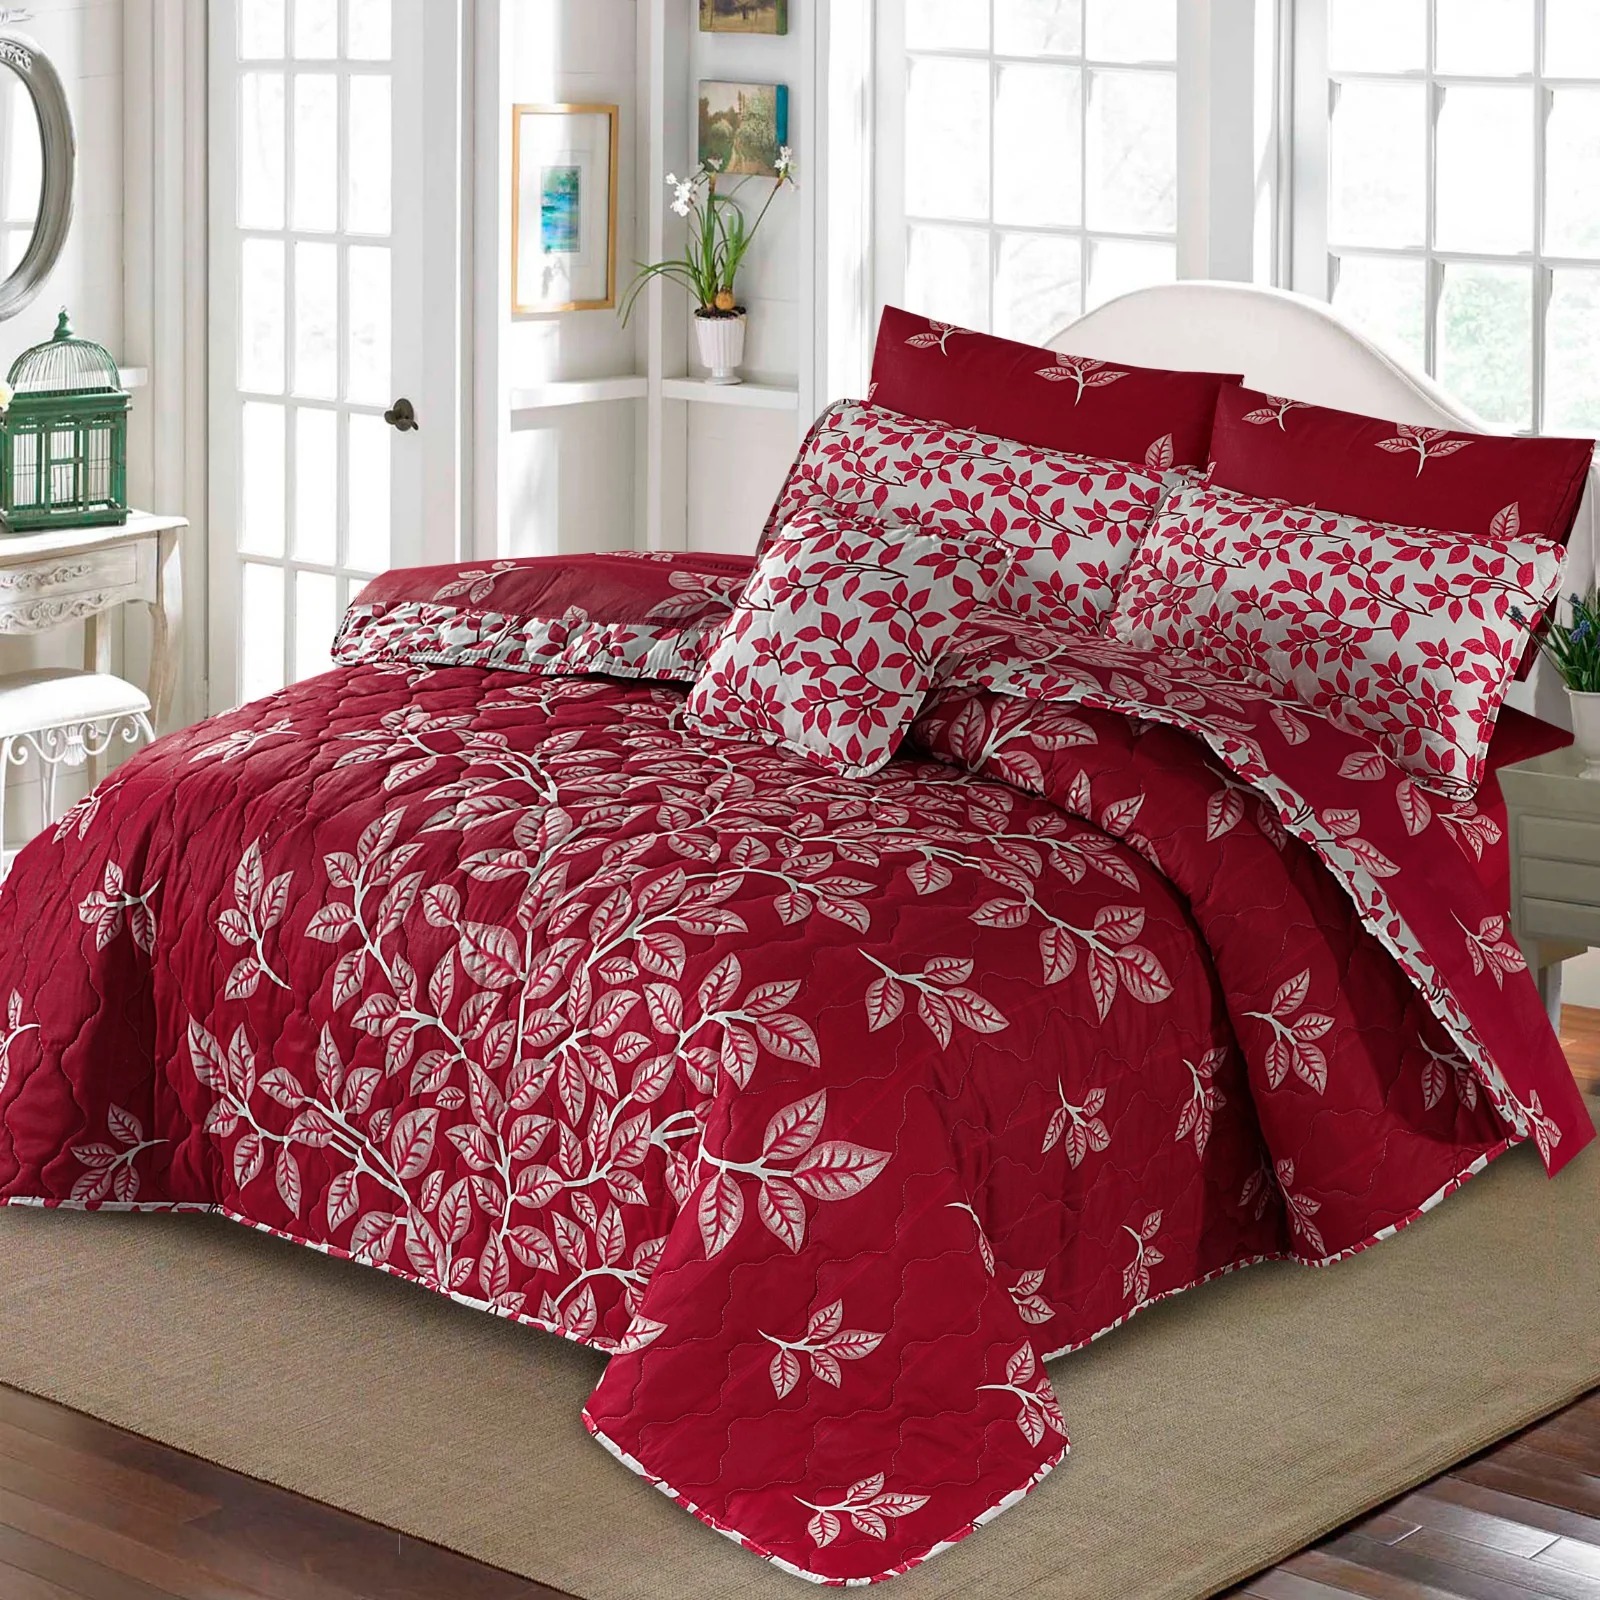 QUILTED COMFORTER SETS